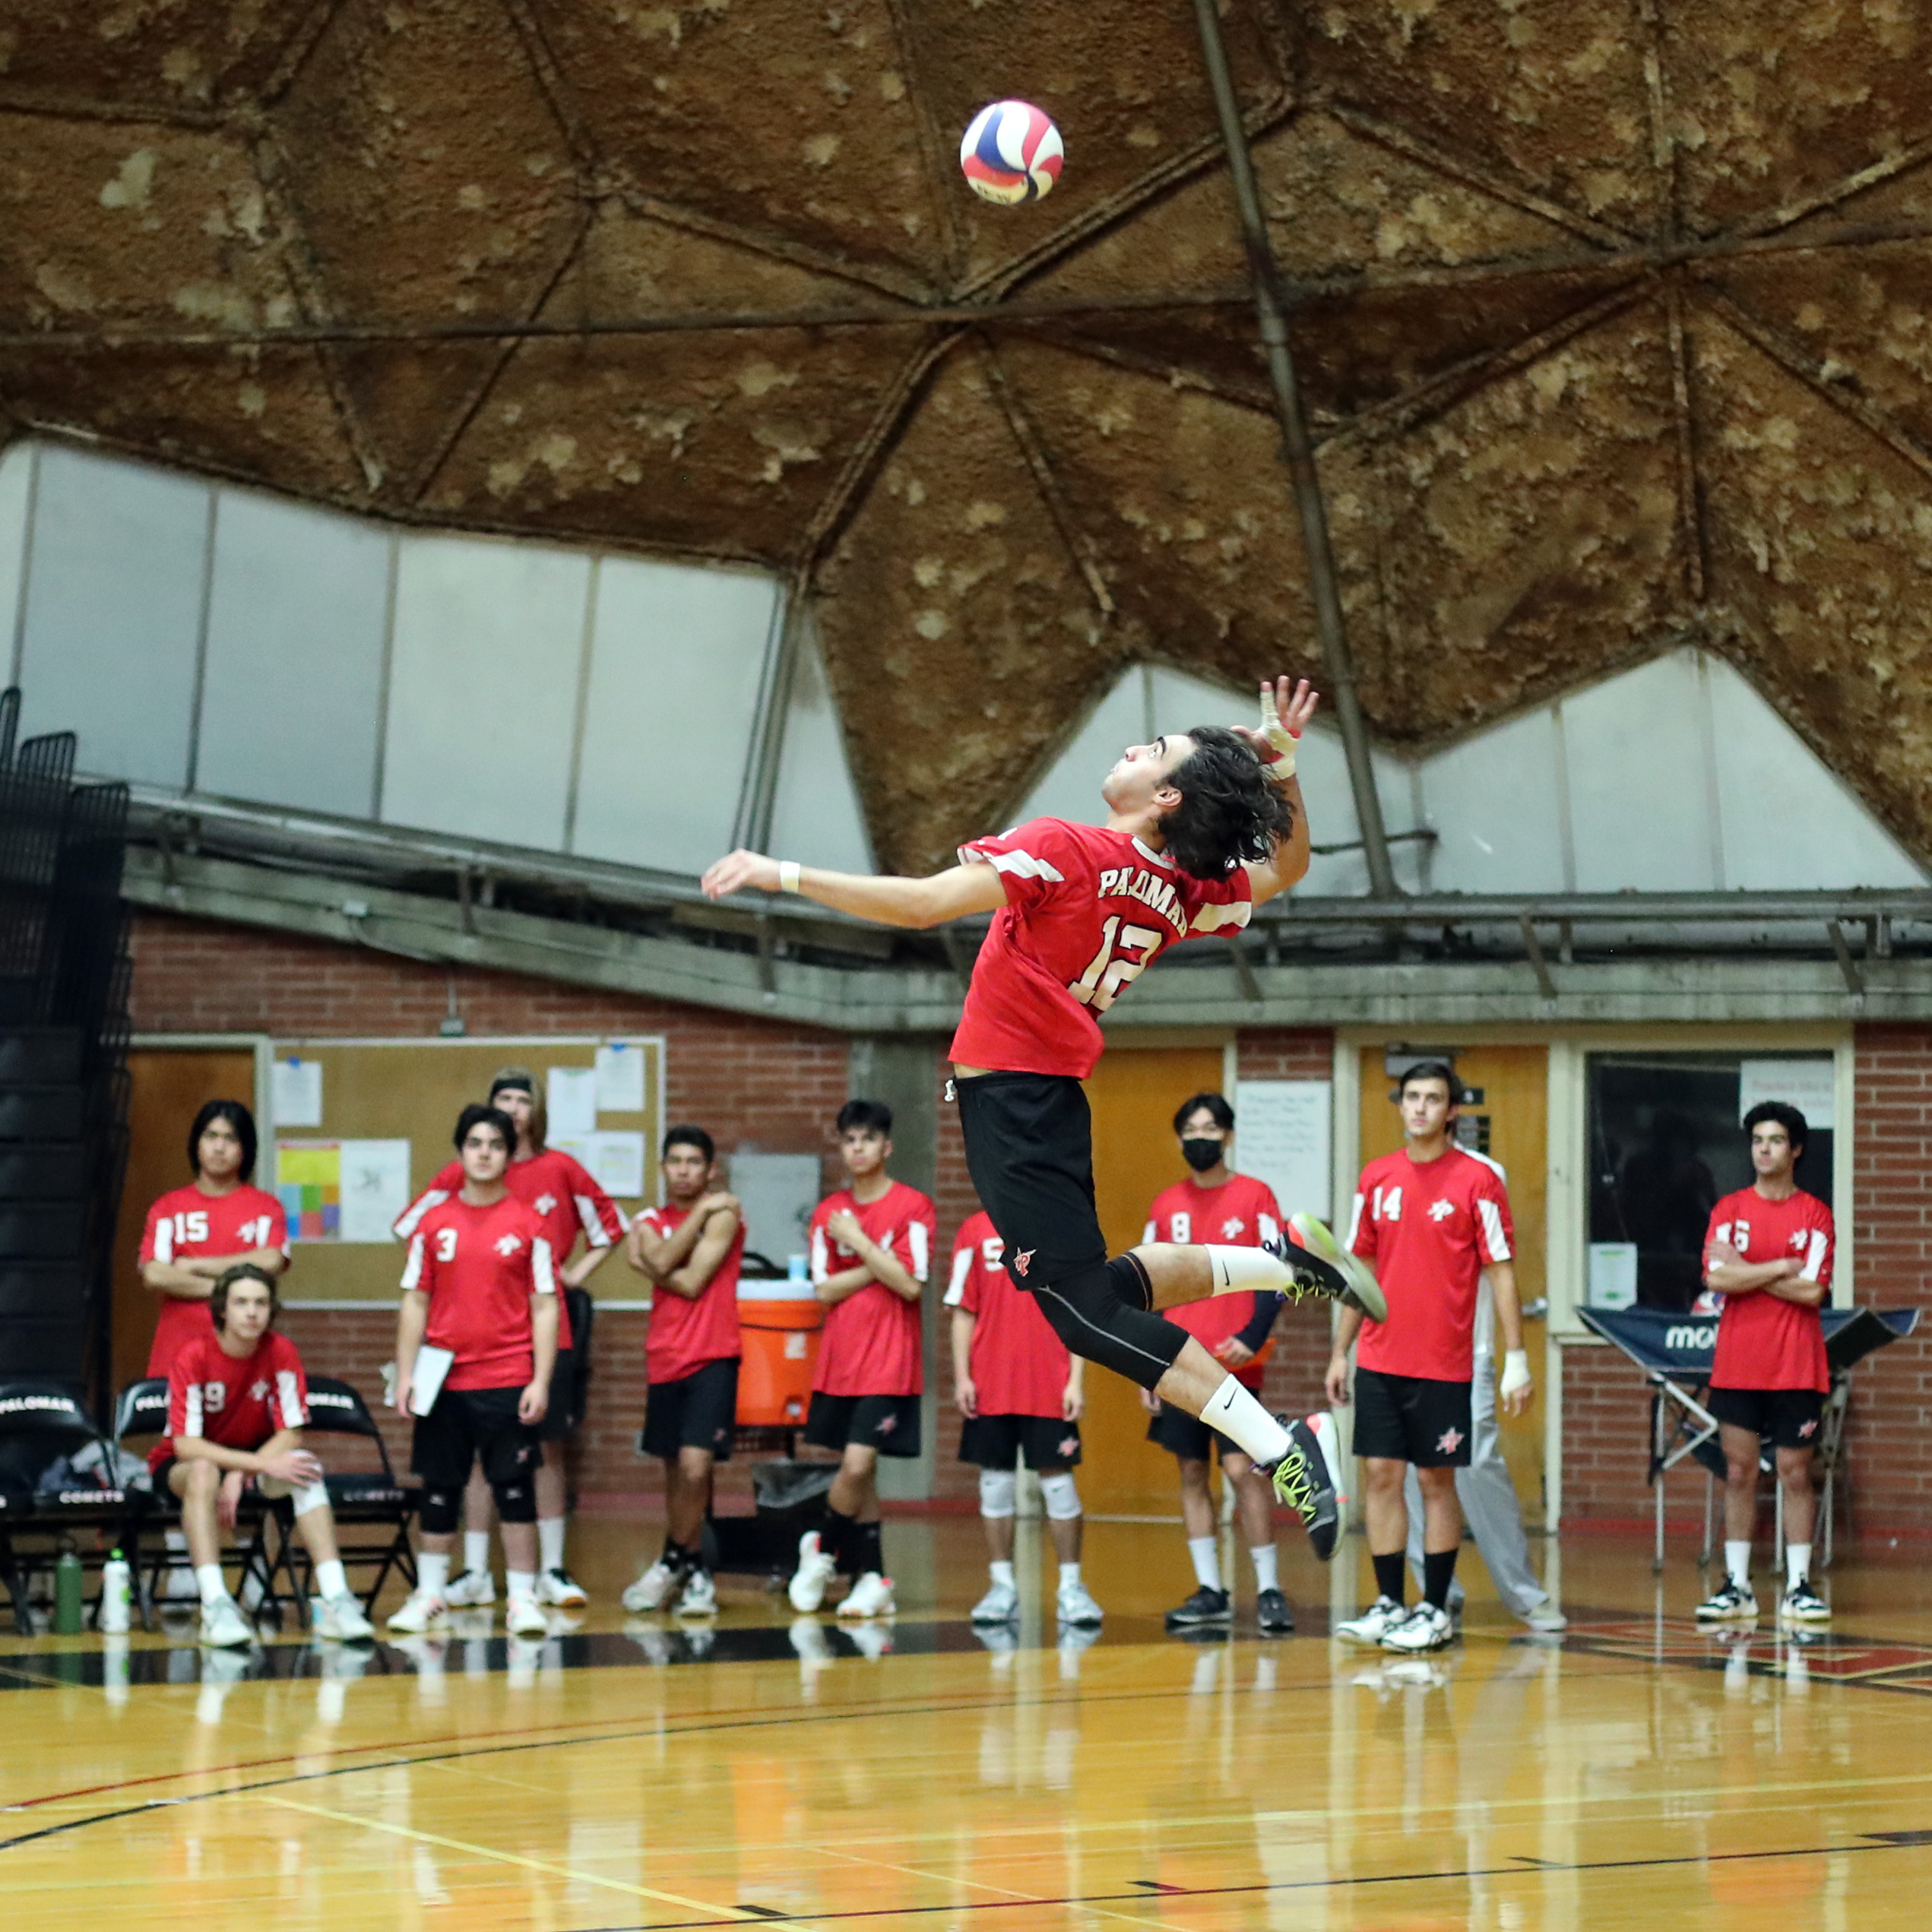 A male Palomar volleyball player leaps in the air and prepares to spike a volleyball. His teammates in the background watches him.